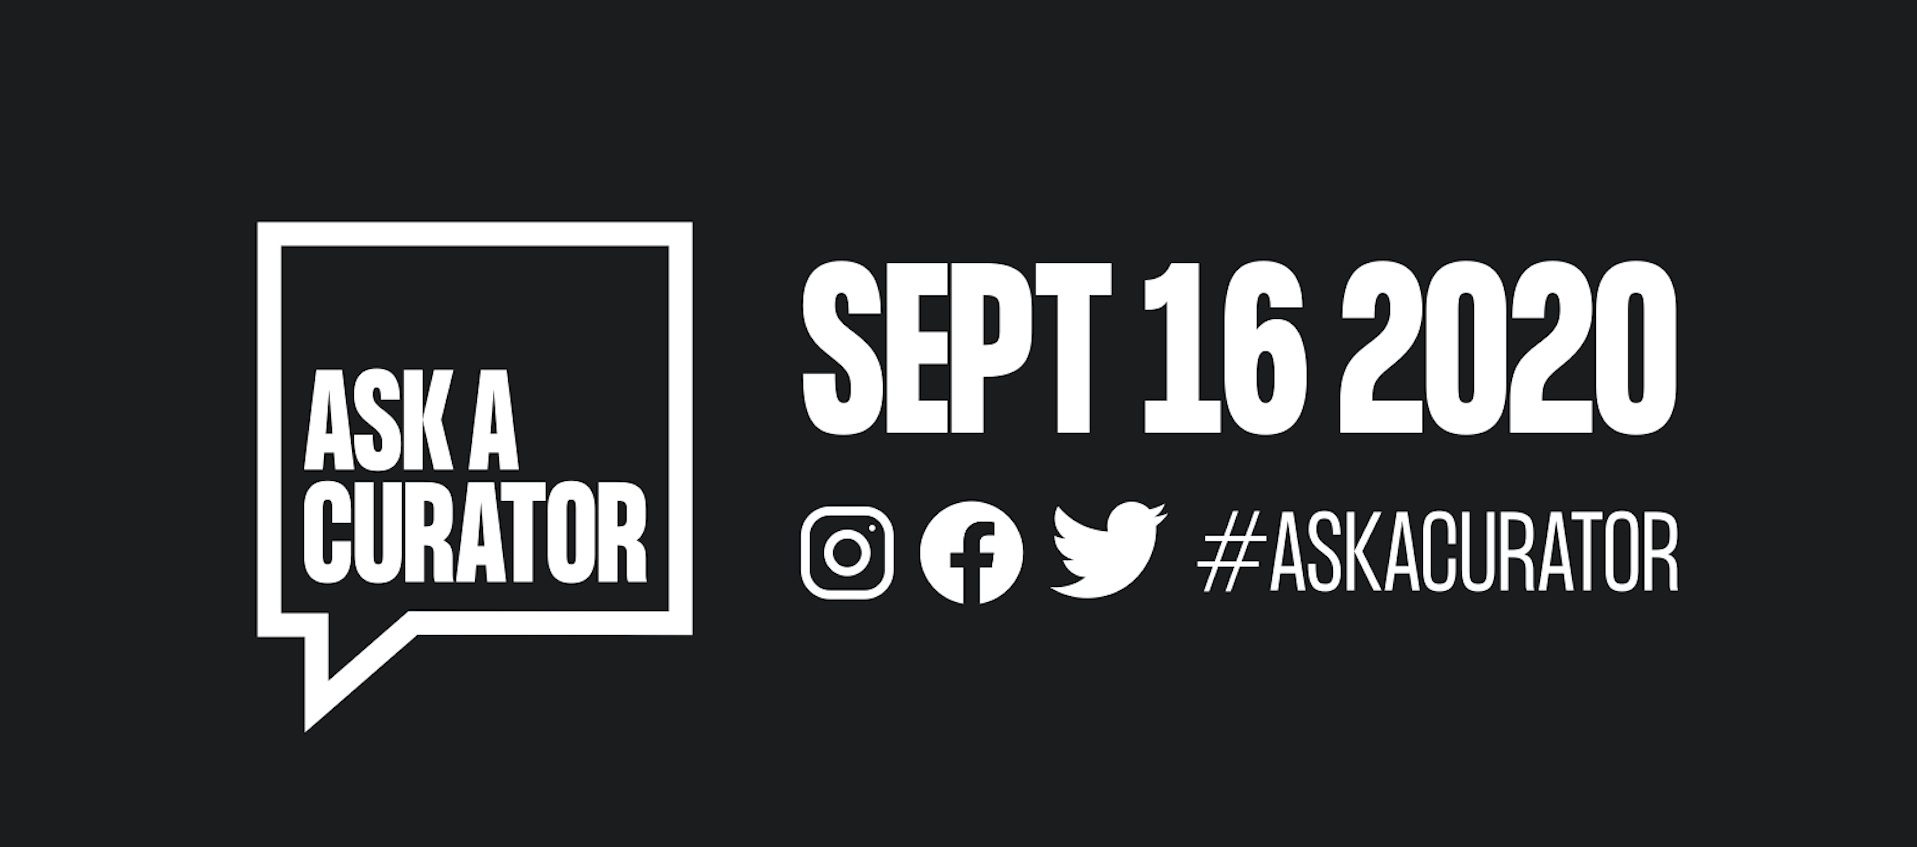 Ask a Curator logo with related hashtag and 2020 date in white on a black background